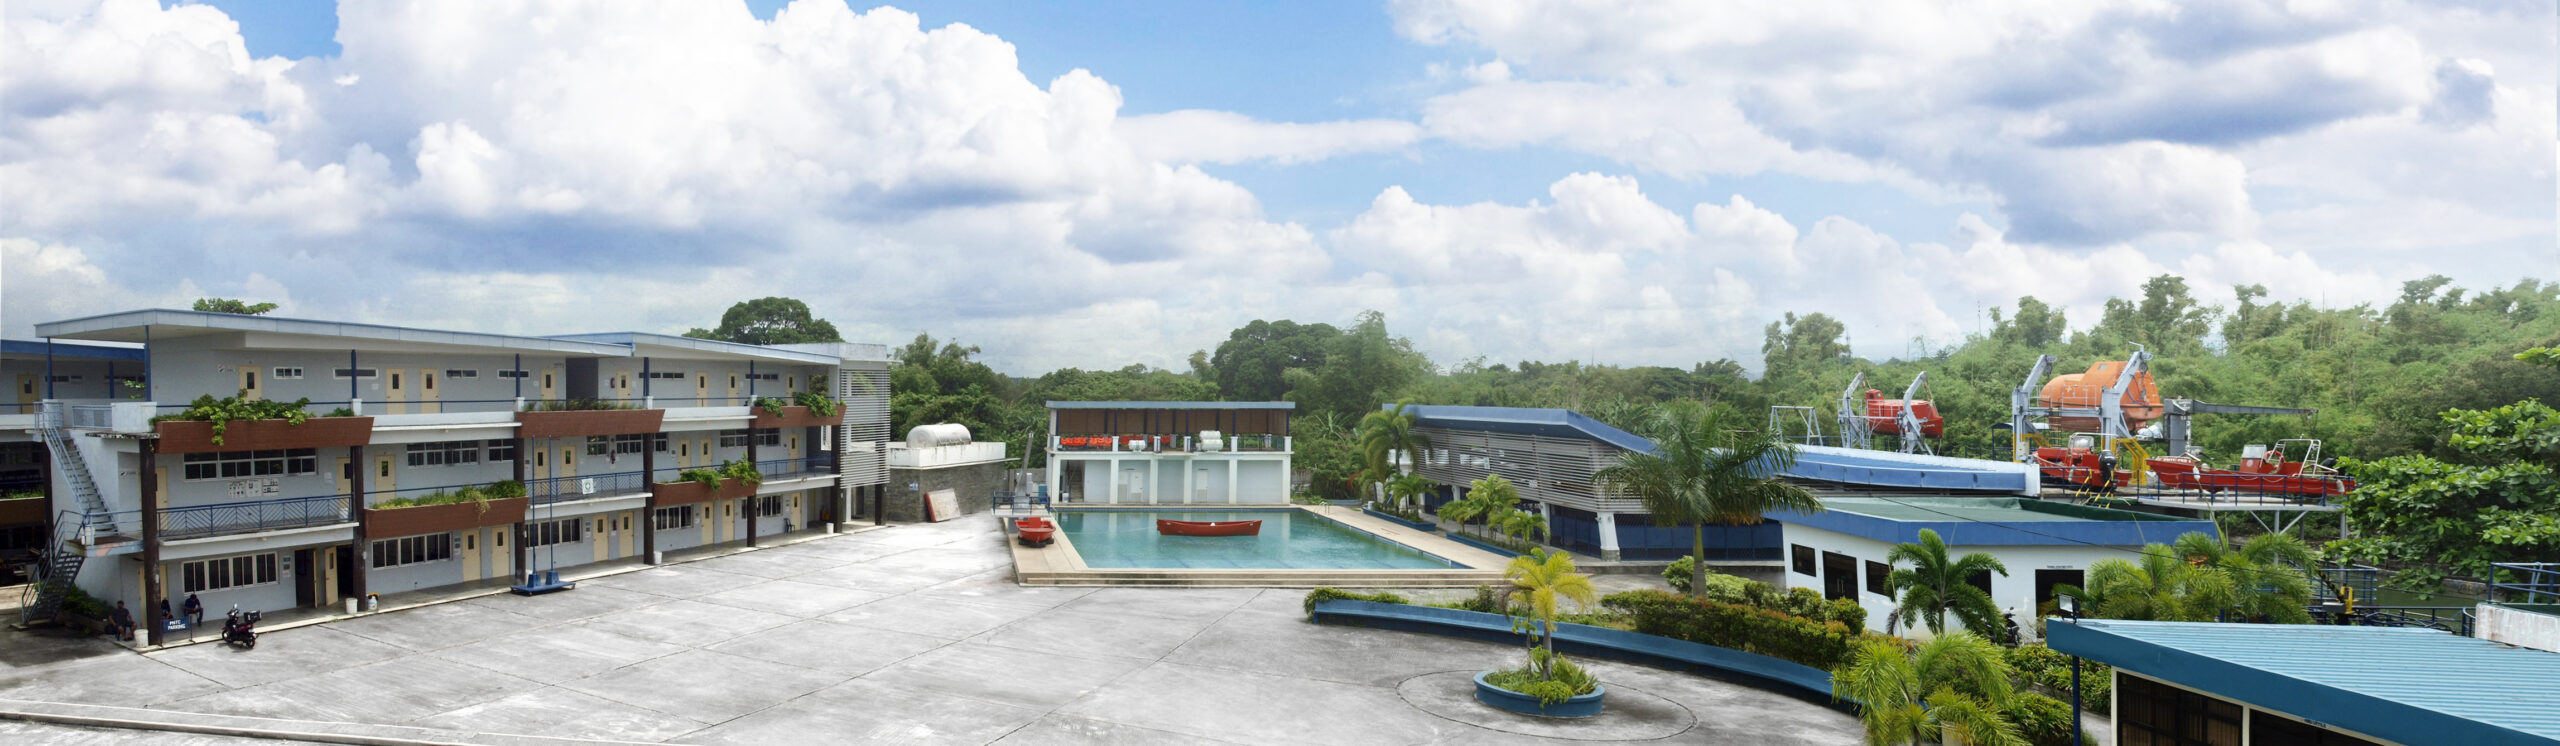 PNTC Colleges - Maritime Training and Assessment Center - Tanza Training Facility